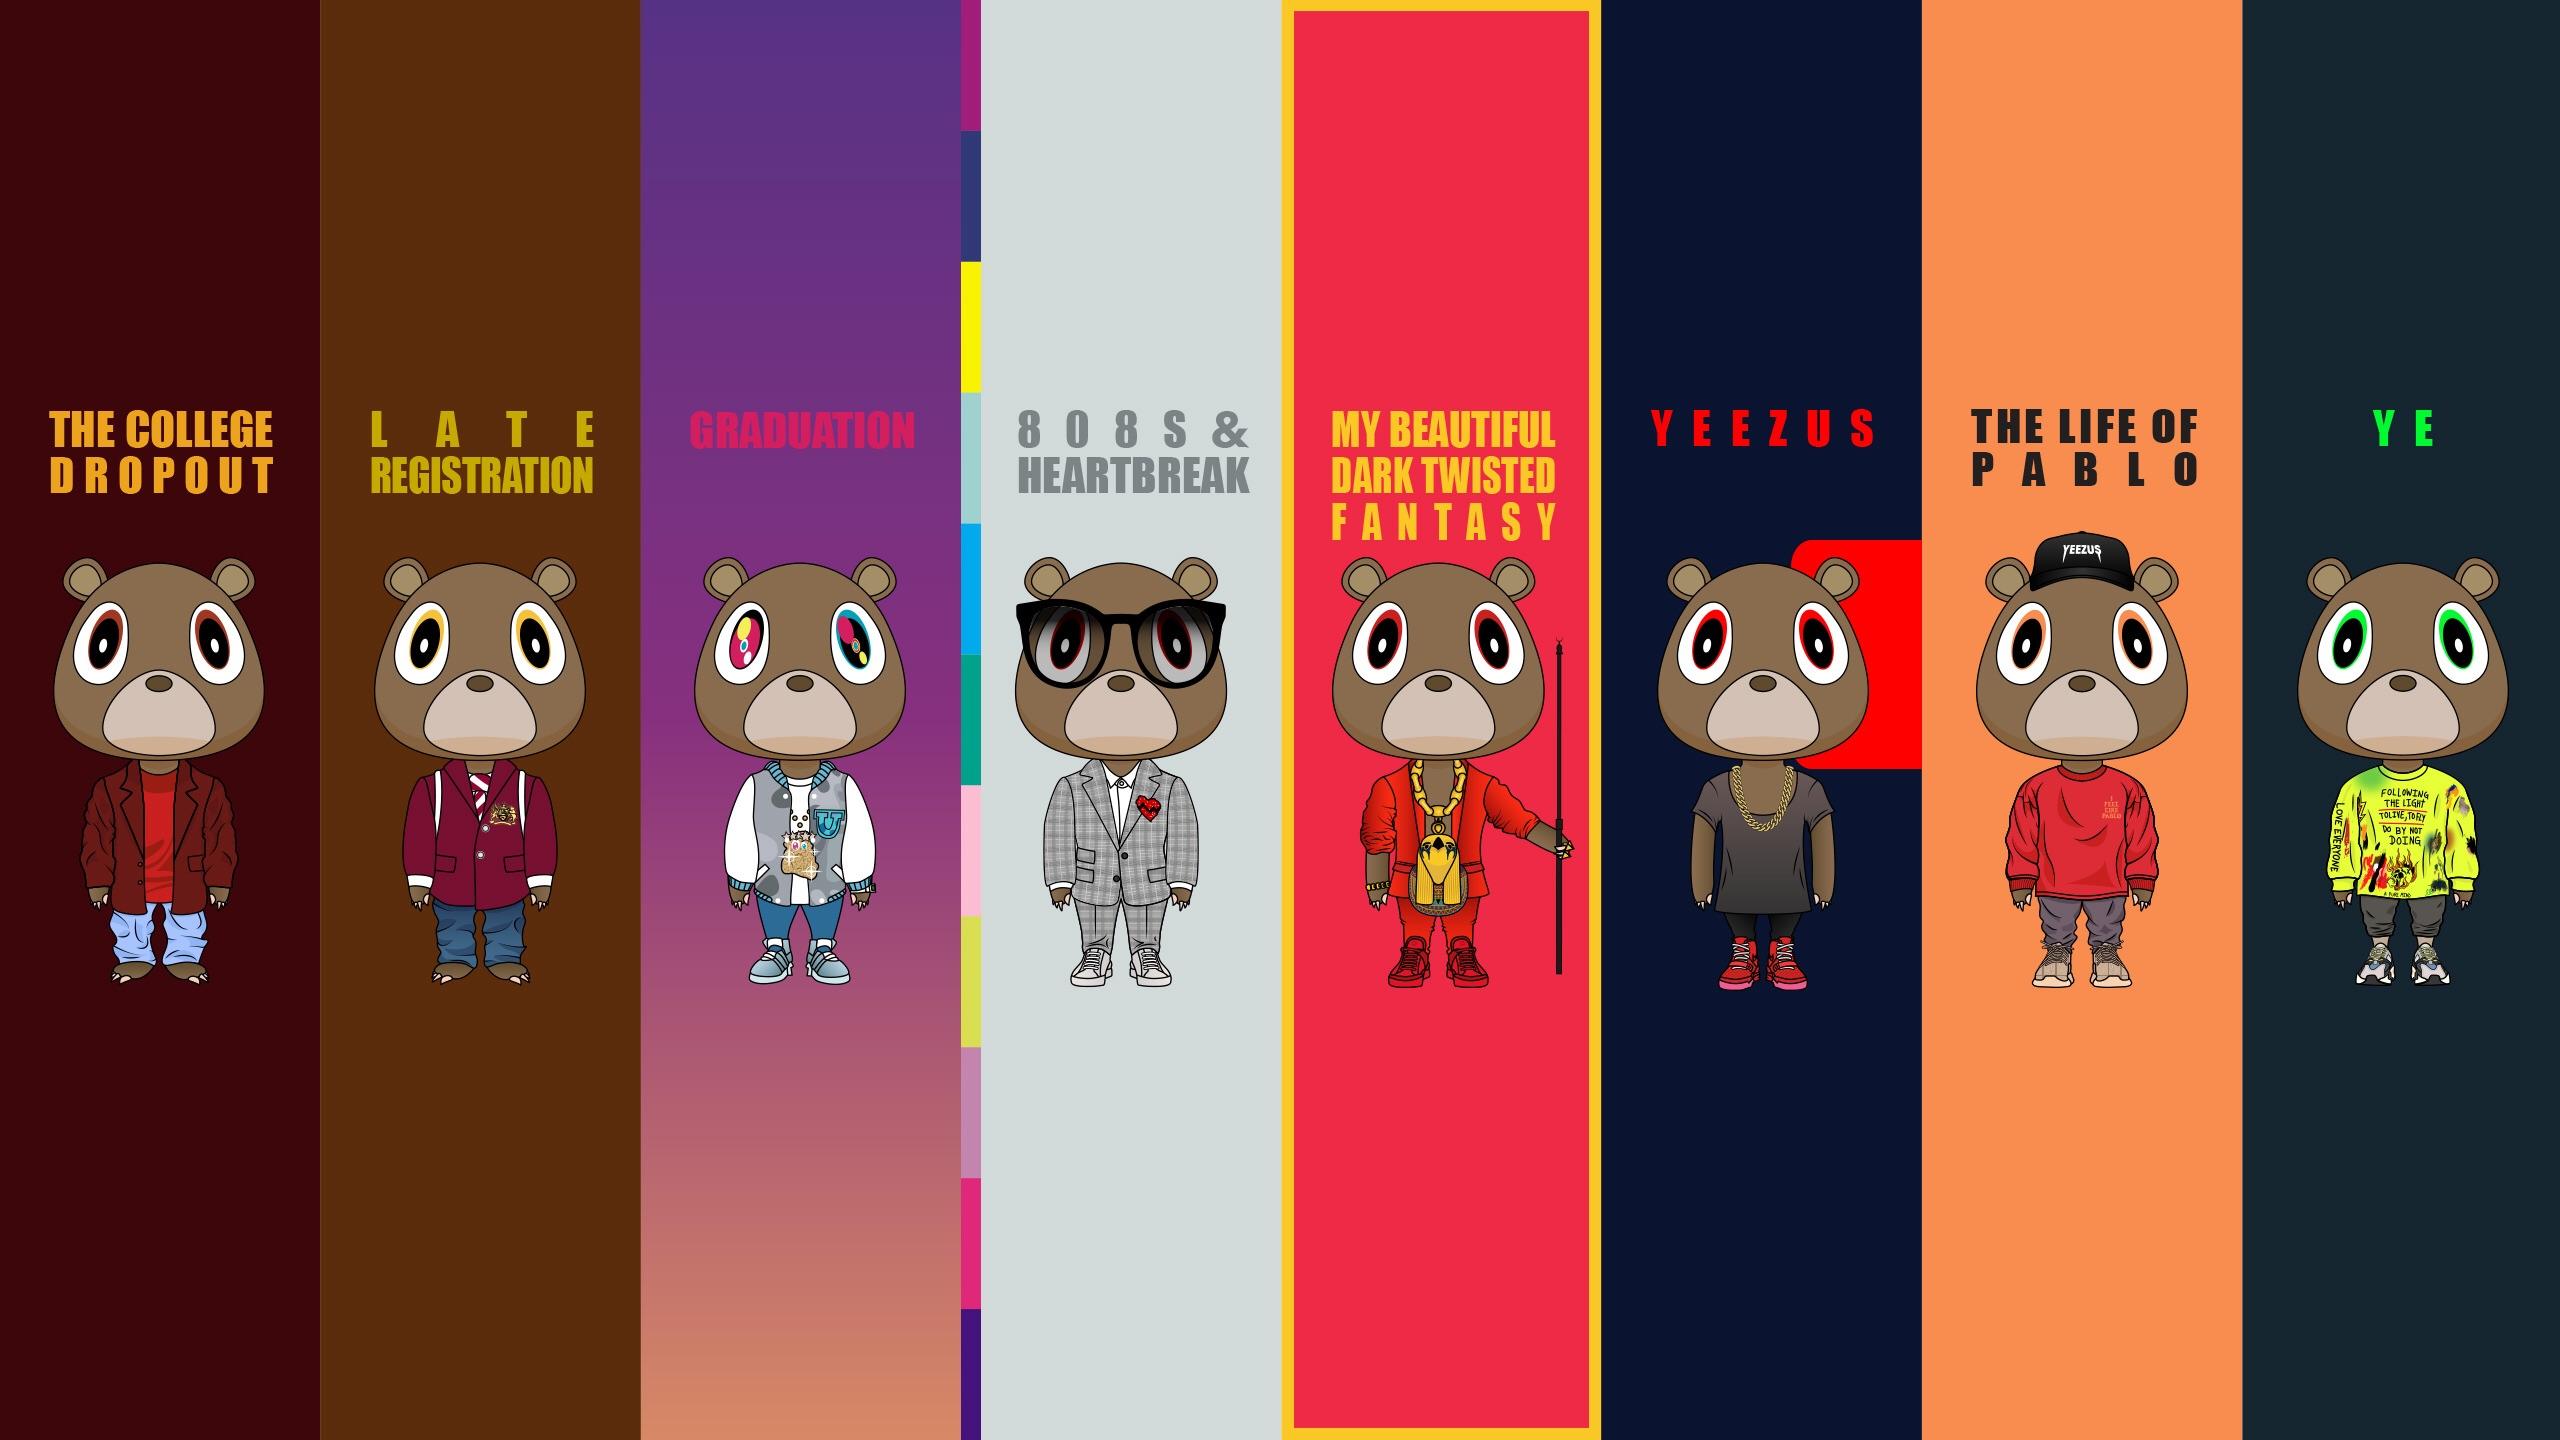 Kanye 1080P 2k 4k Full HD Wallpapers Backgrounds Free Download   Wallpaper Crafter